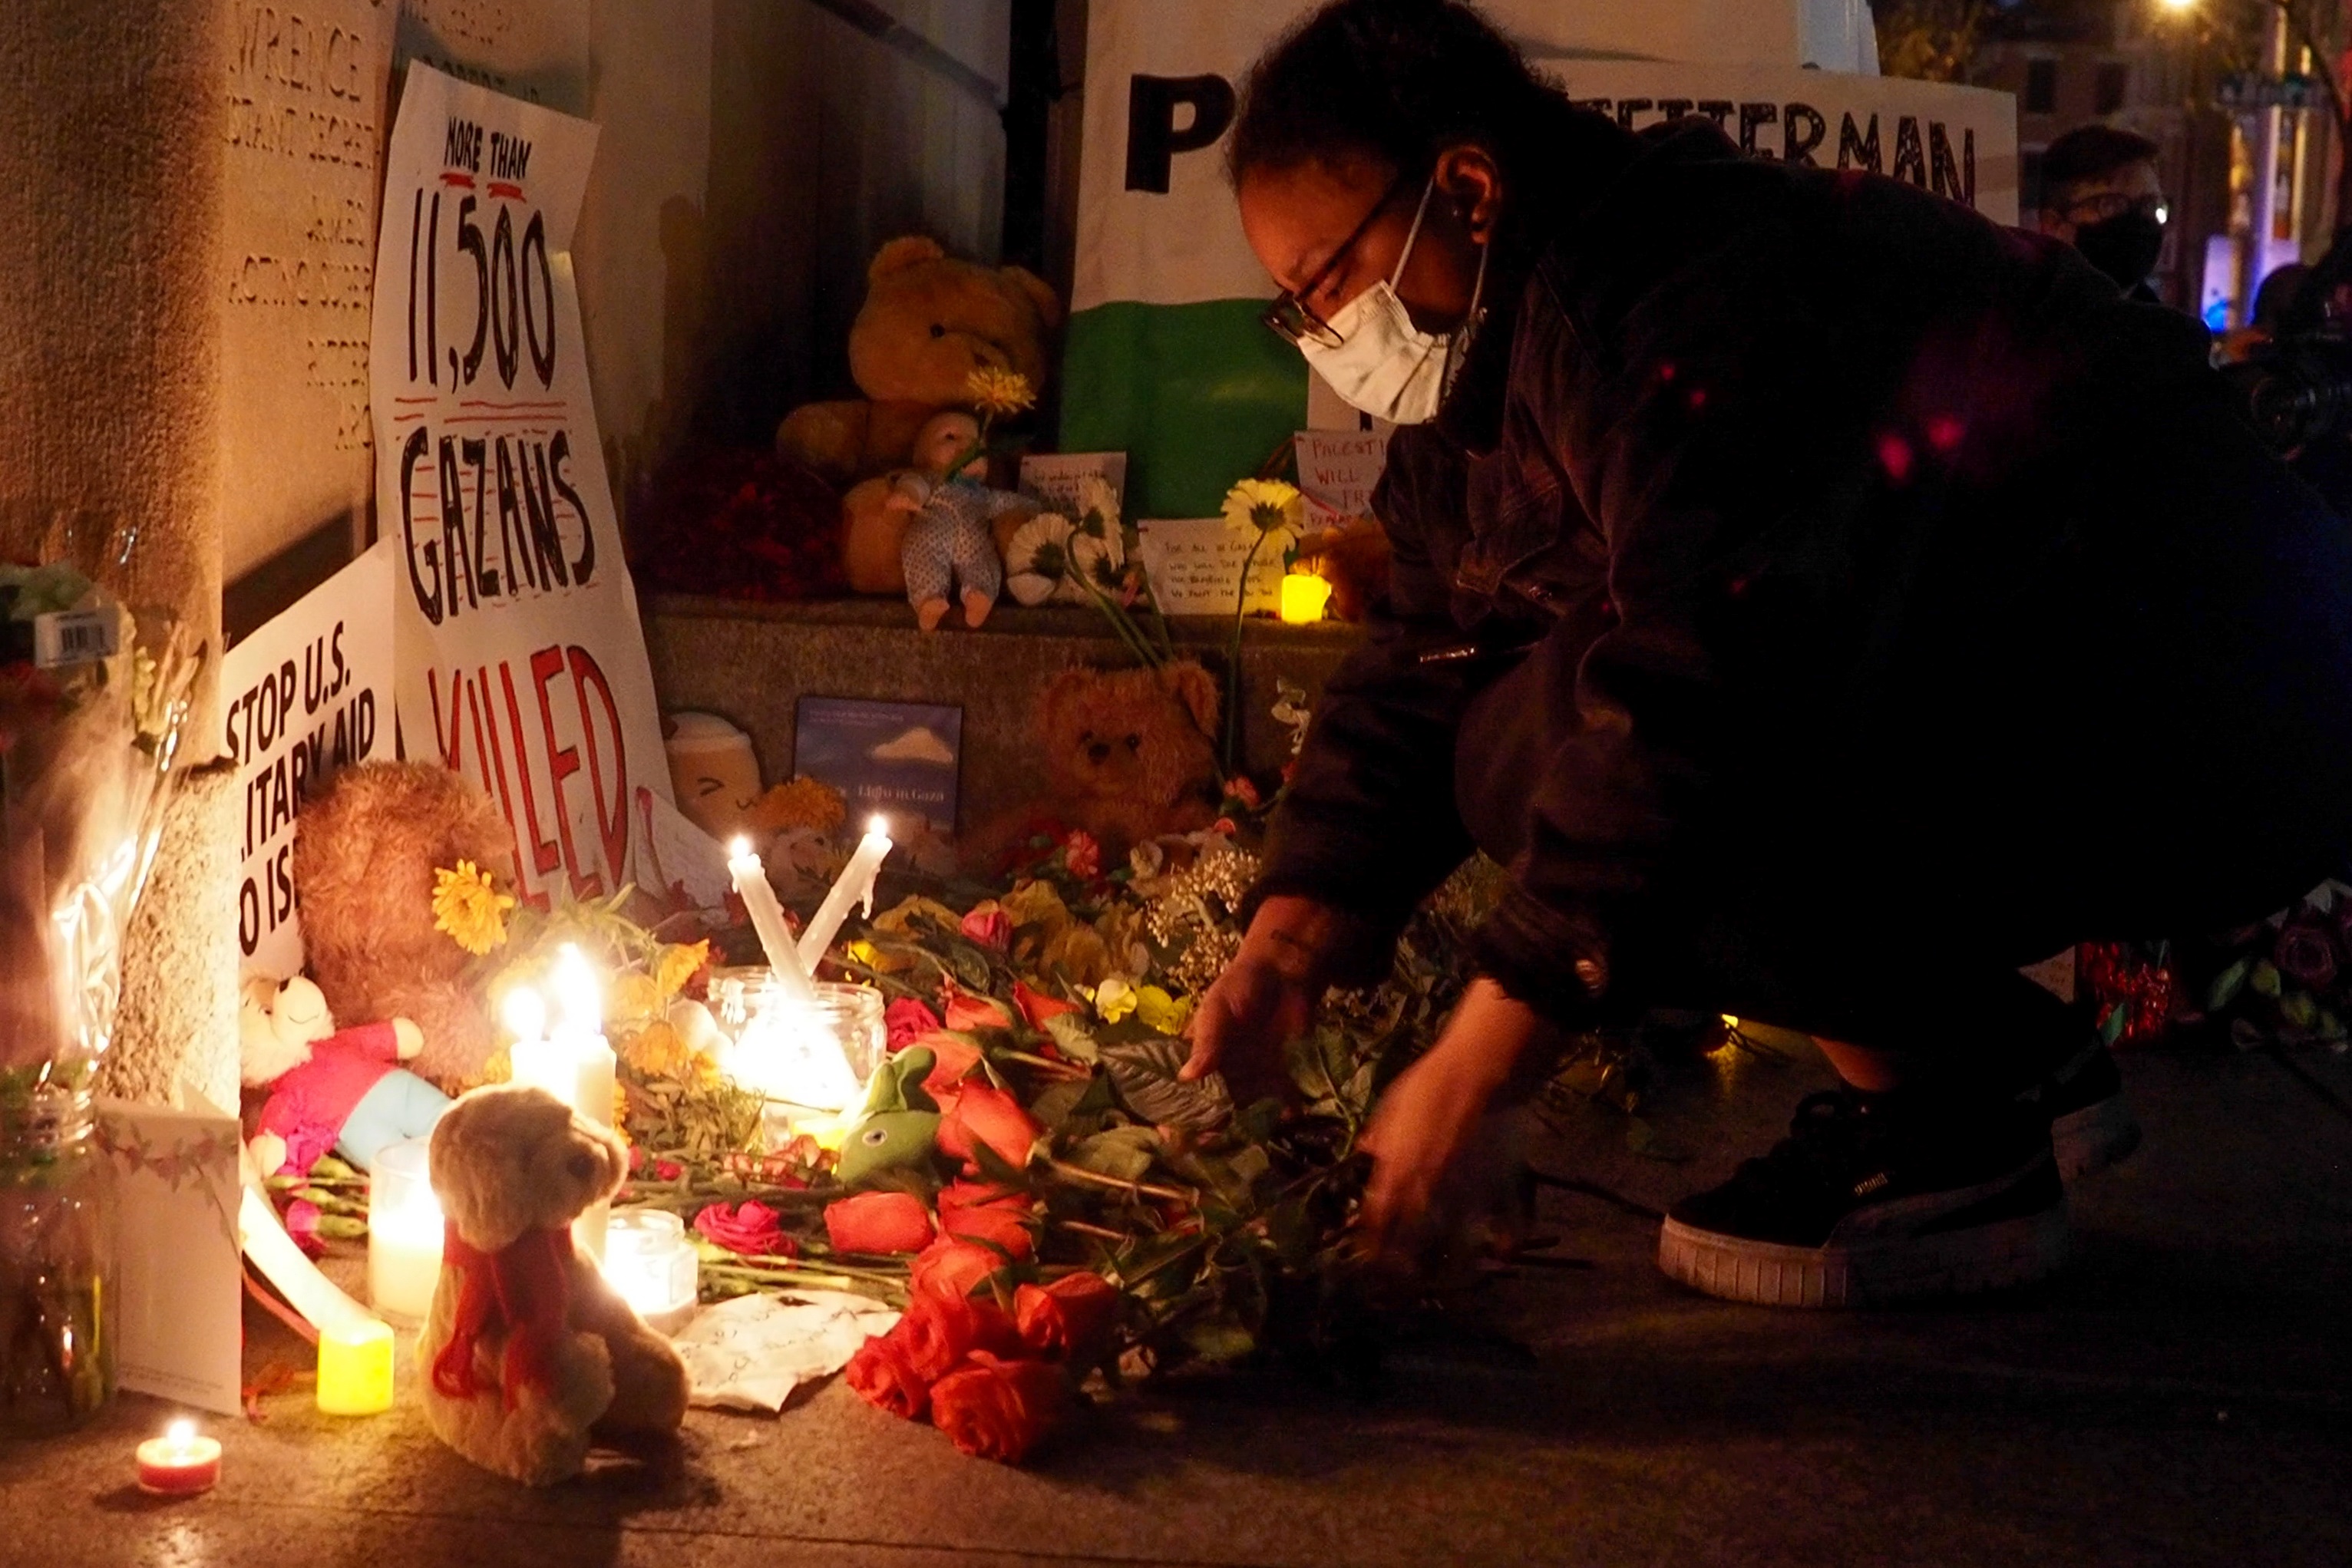 Person with mask kneels on ground in front candles, flowers, and signs